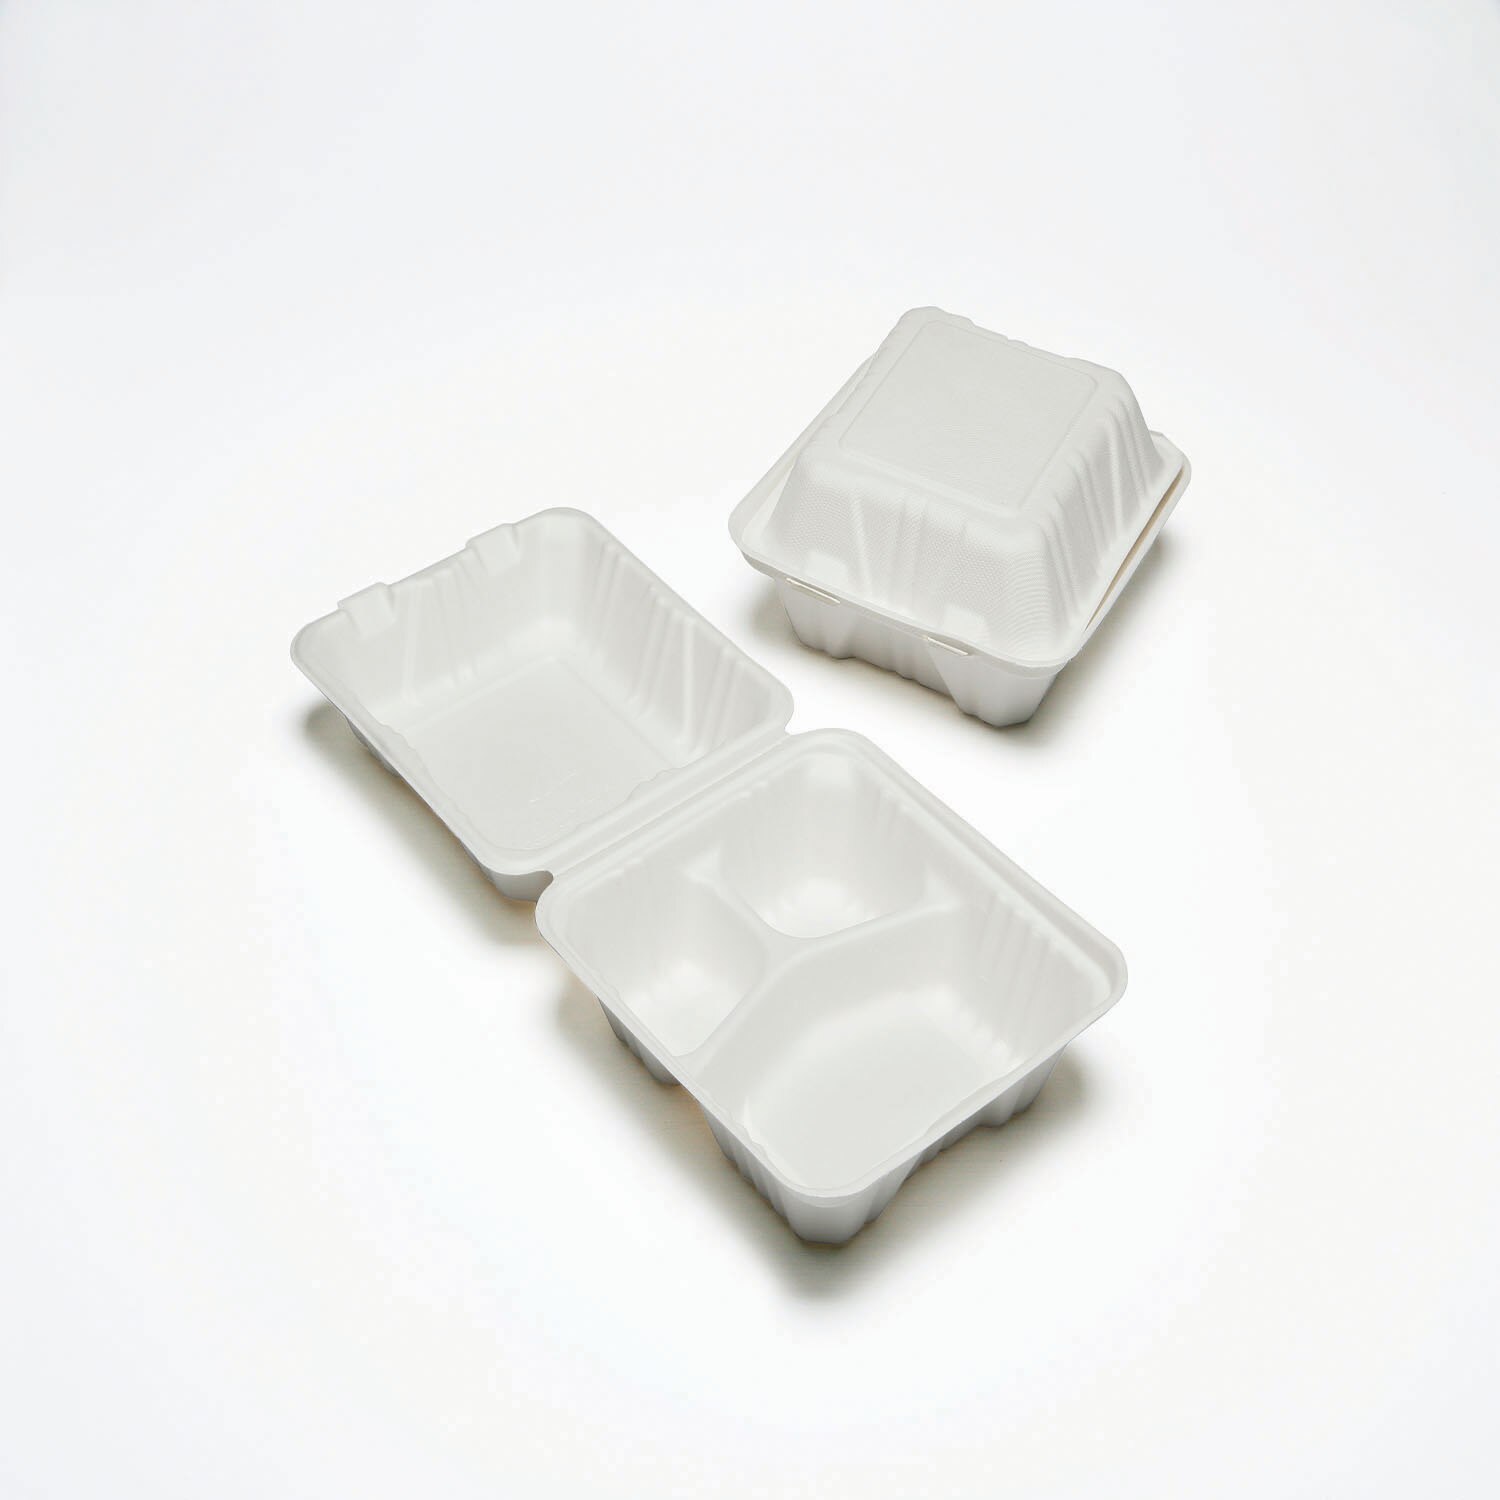 Hinged Lid Tray, Mess, 3 compartment, White, 8" x 8" x 3"